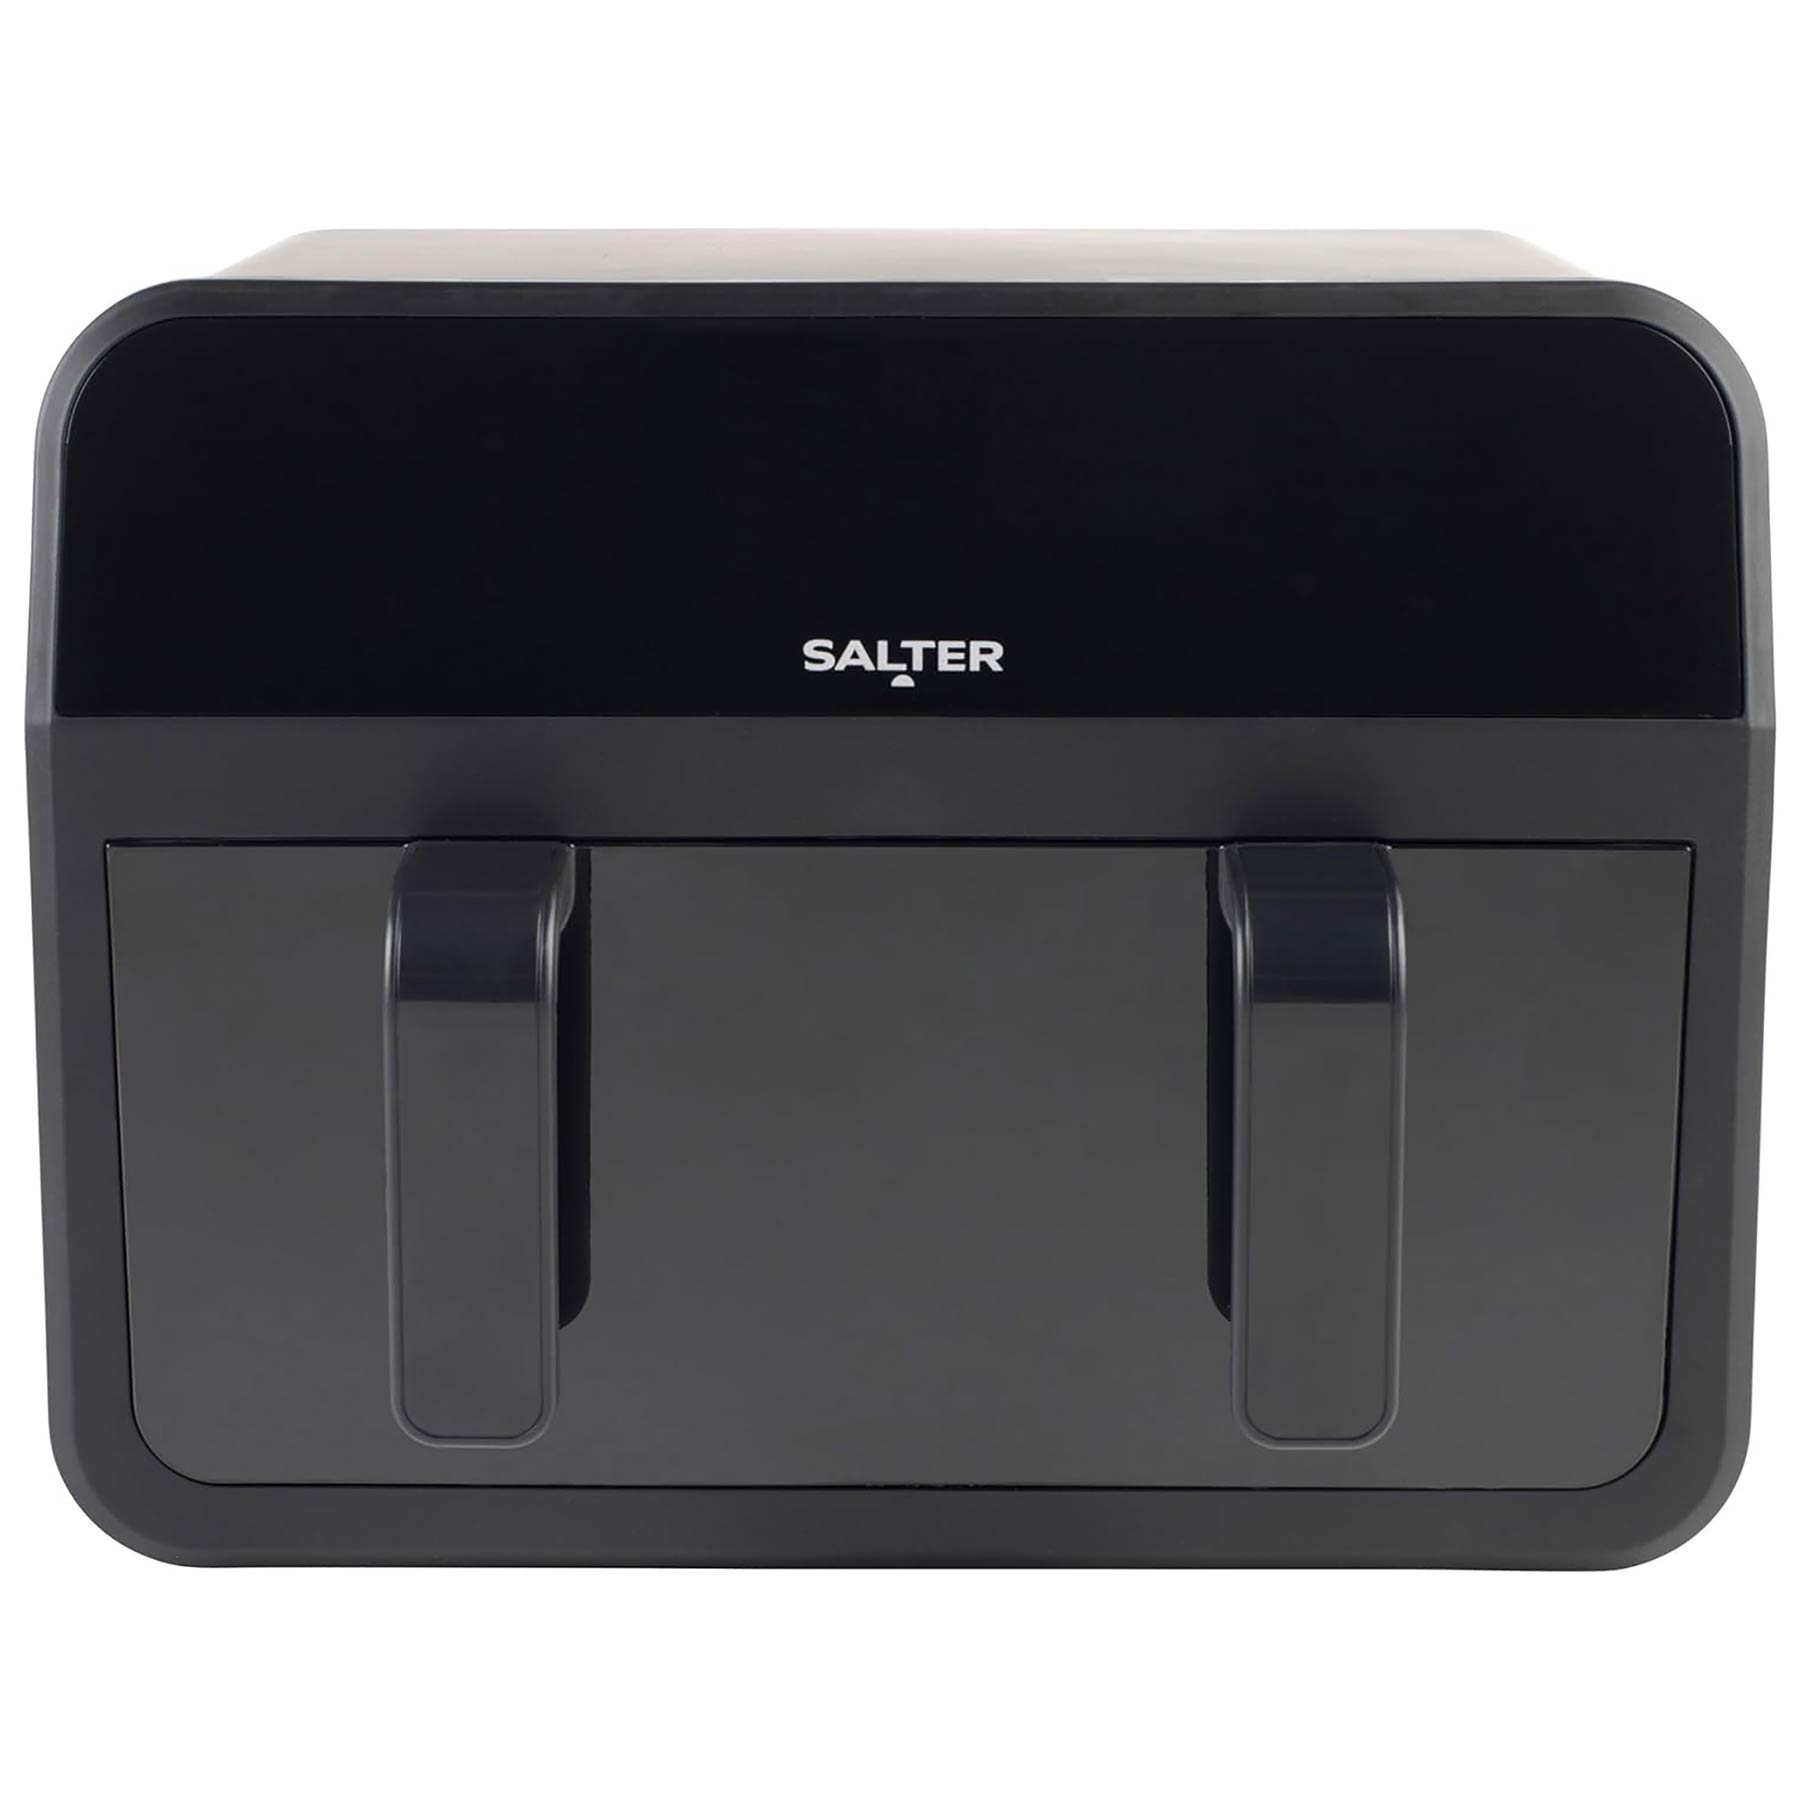 Salter EK5872 7L Dual View Air Fryer with Compartment Divider